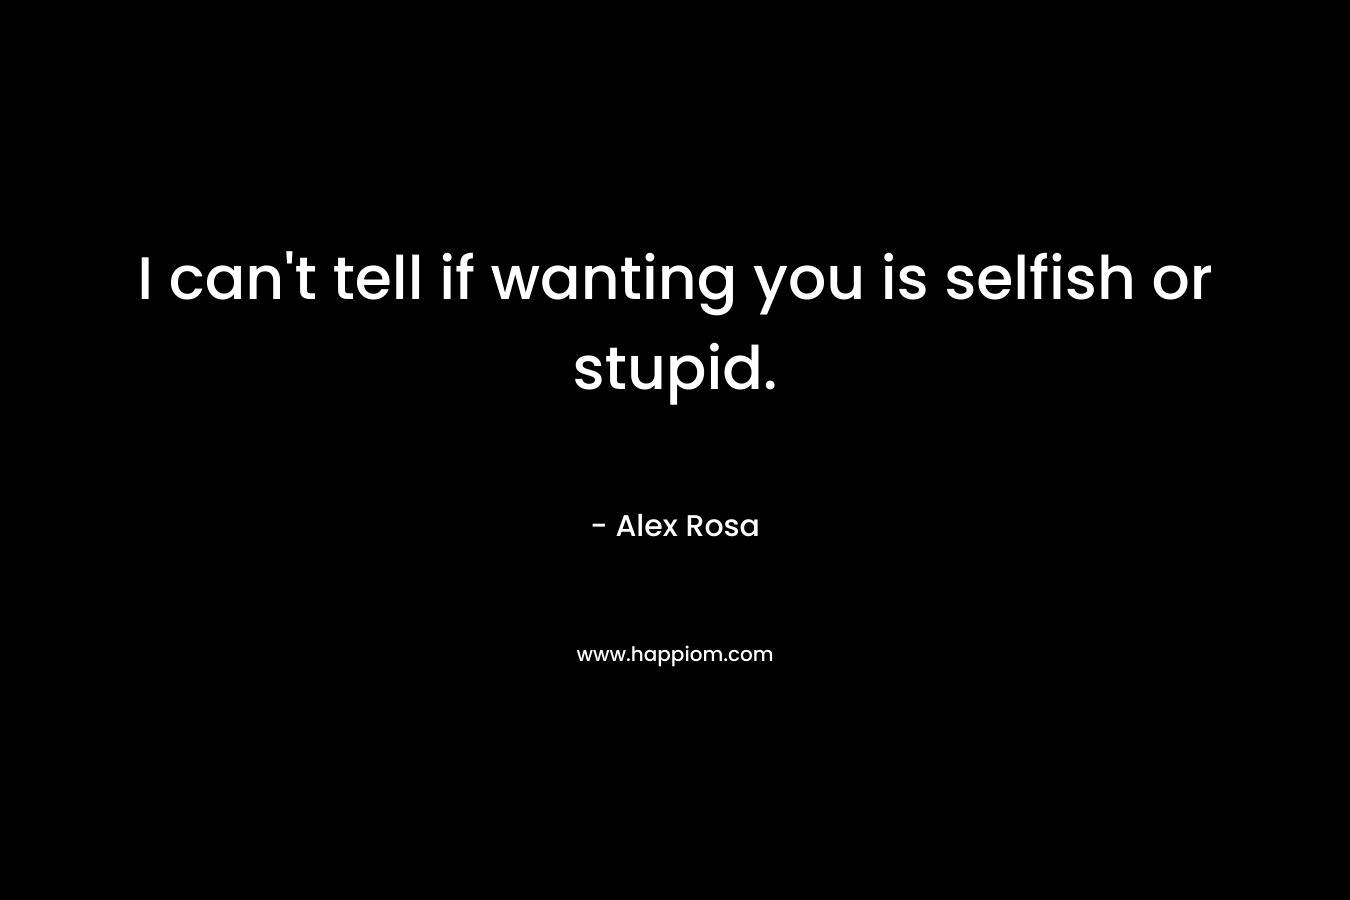 I can't tell if wanting you is selfish or stupid.